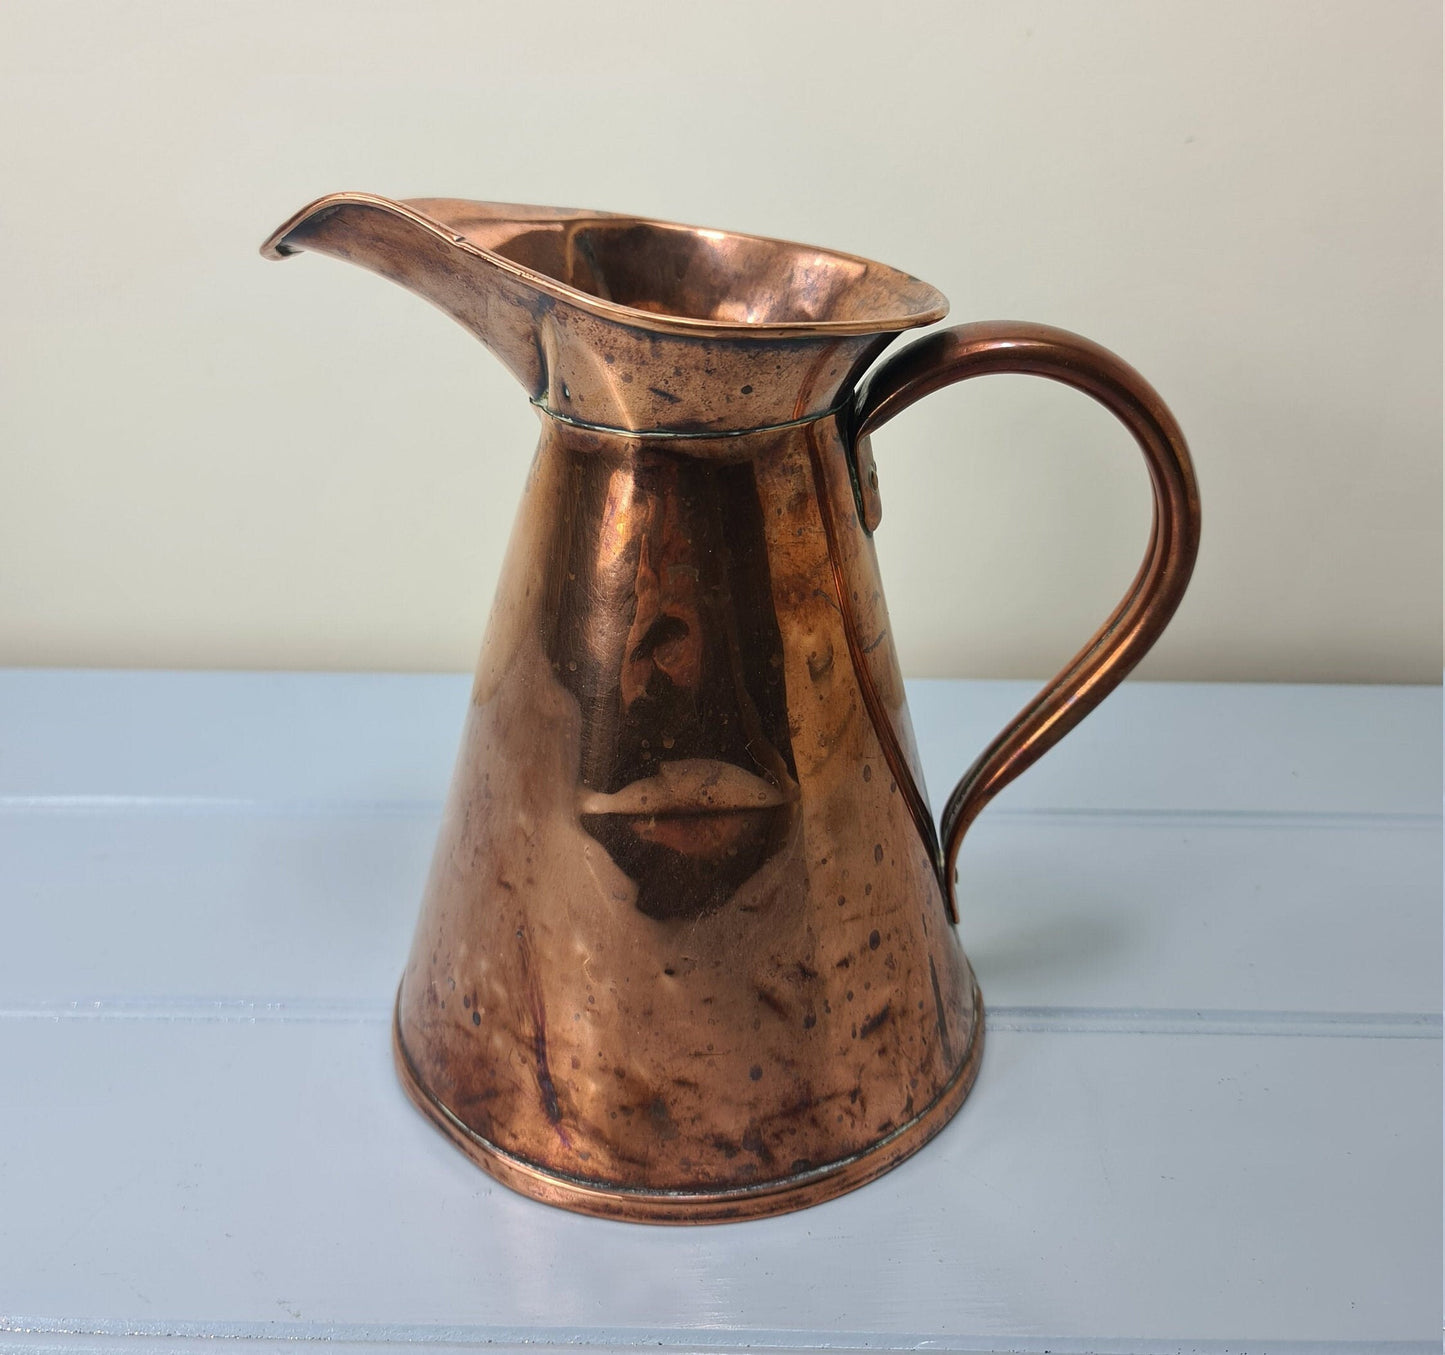 Rare antique Victorian copper jug by Henry Wilson & Co Ltd of Liverpool Branded RMSP Antique 19th cent water/cider/wine pitcher Shabbychic